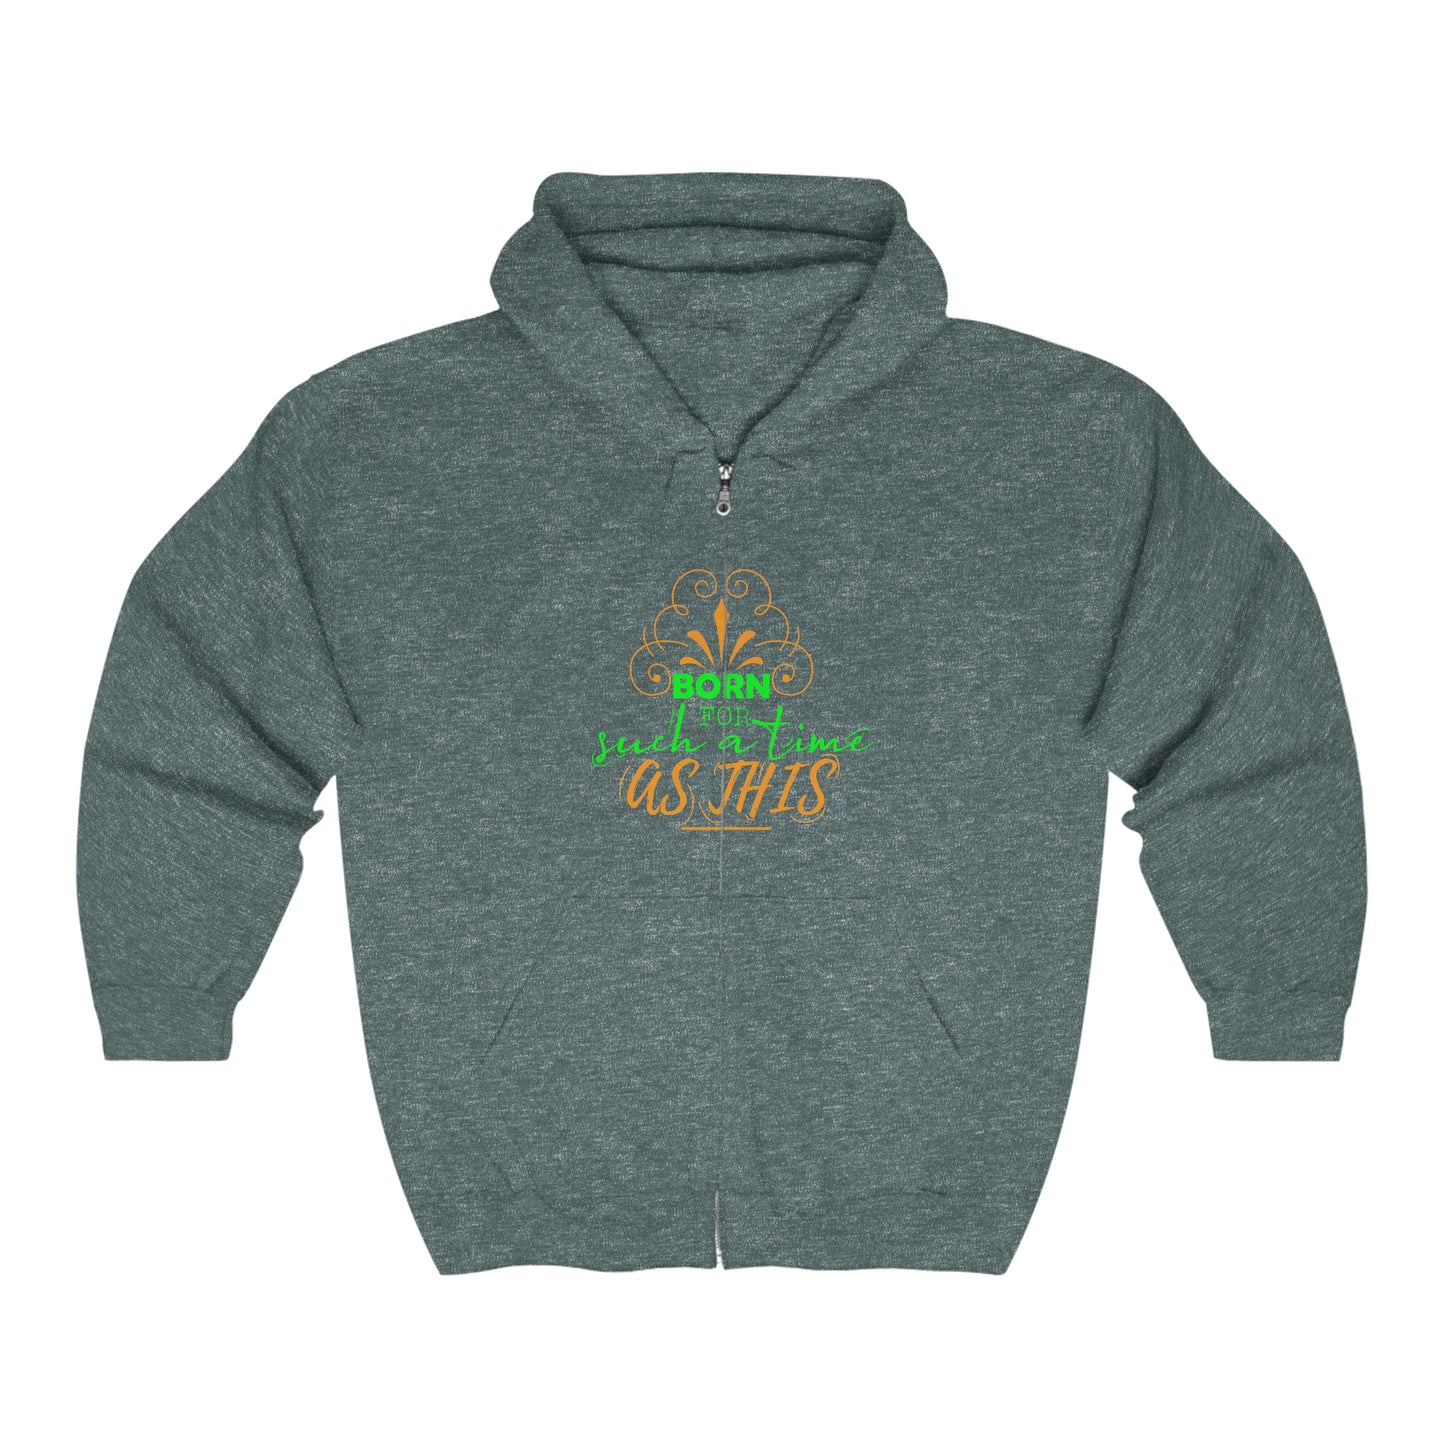 Born For Such A Time As This Unisex Heavy Blend Full Zip Hooded Sweatshirt